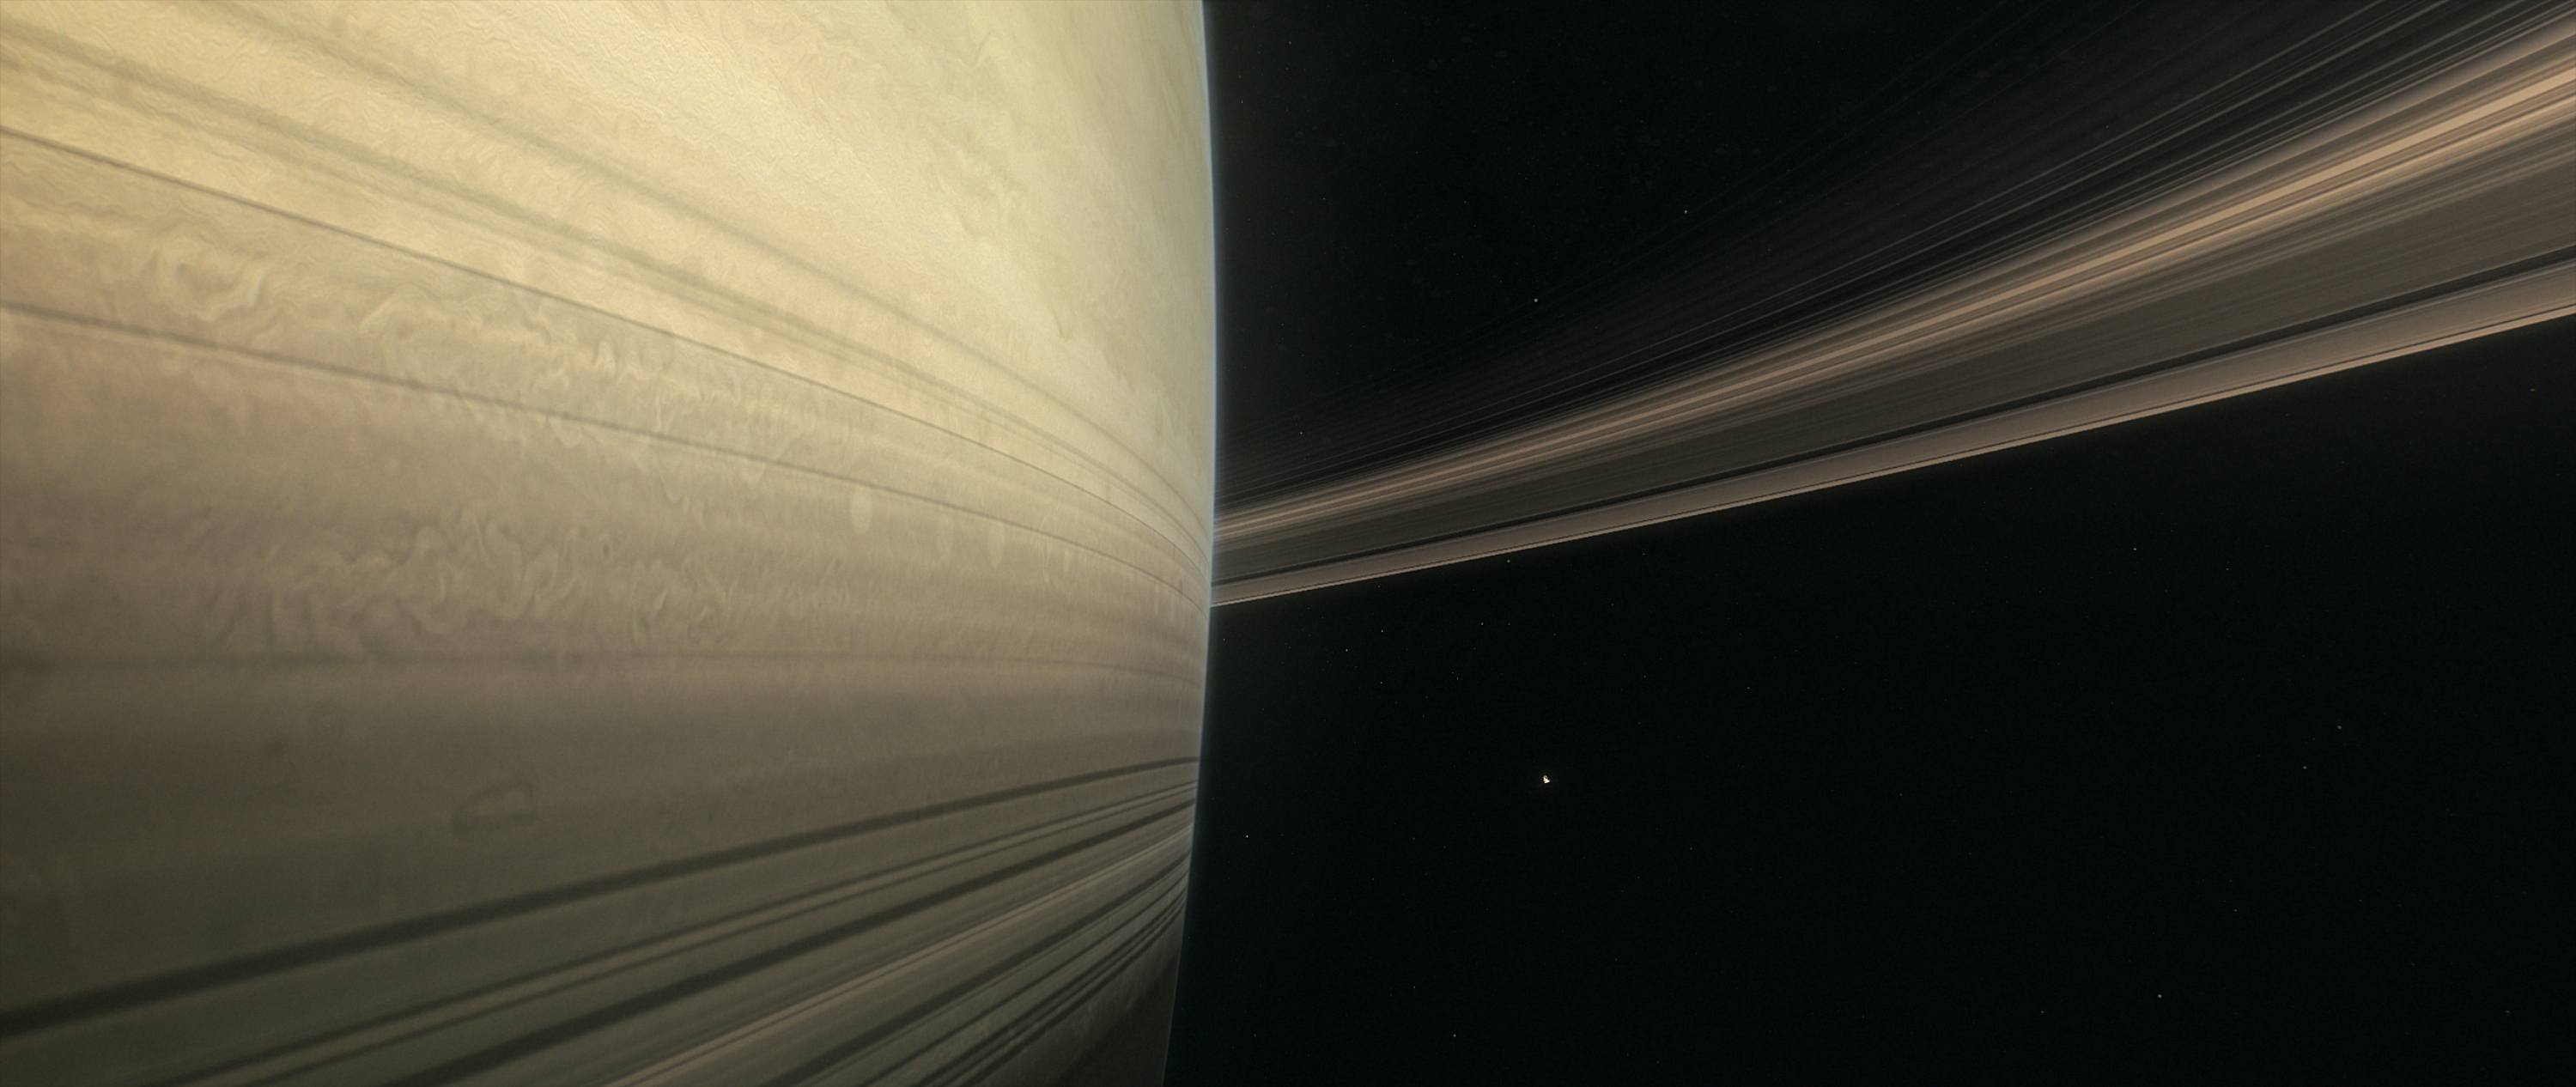 Illustration of the gap between Saturn and its rings.